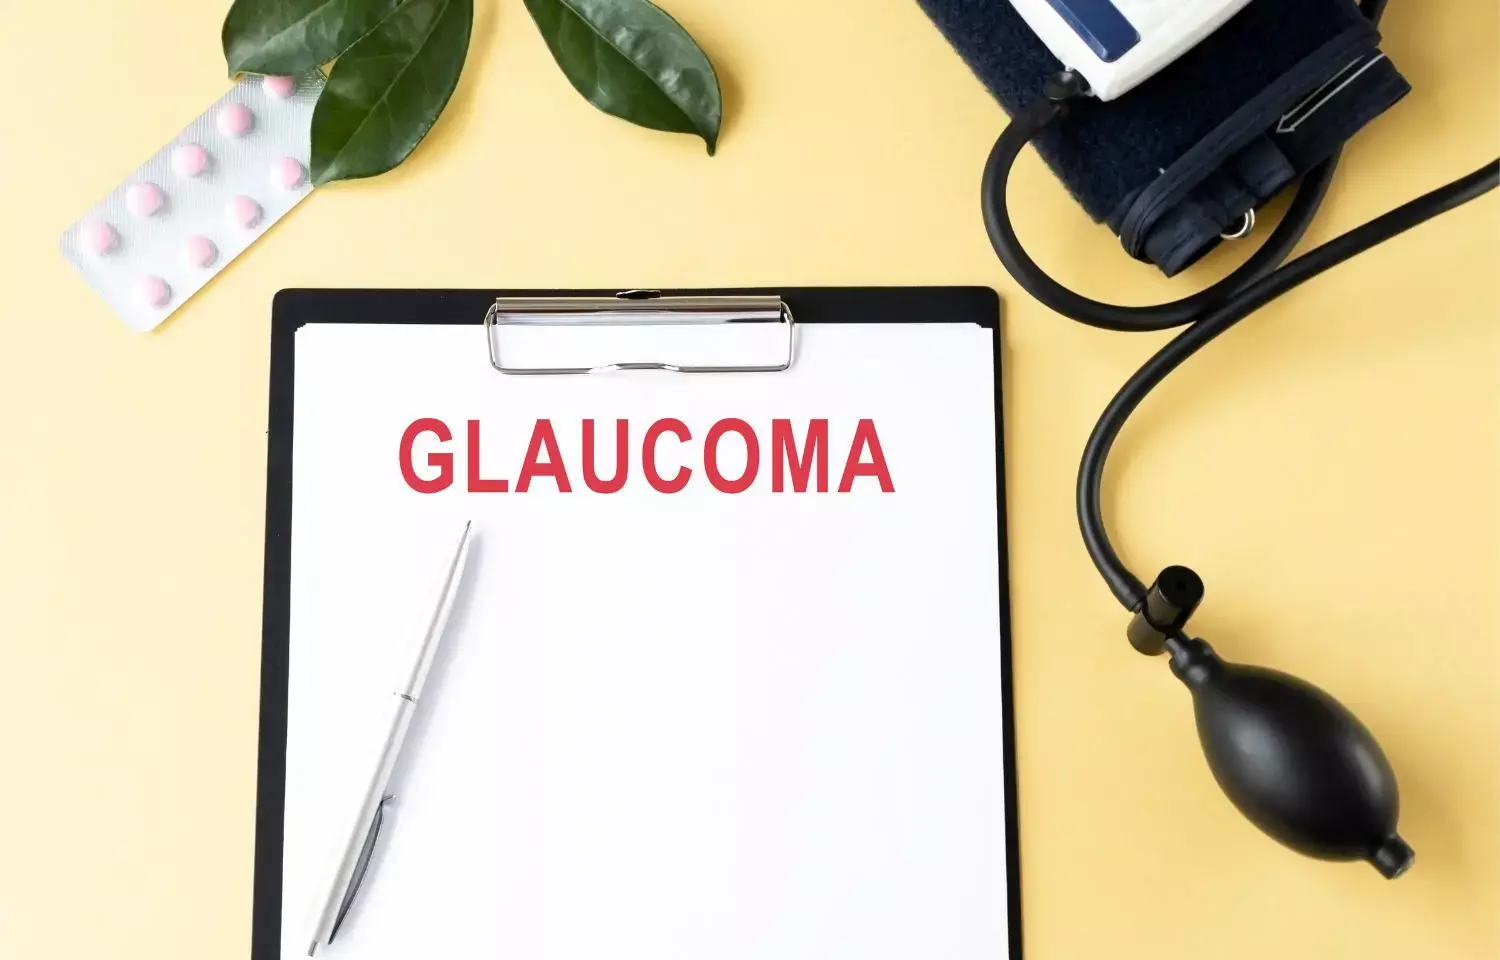 Normal-Tension Glaucoma closely associated with cognitive deficits: BMJ